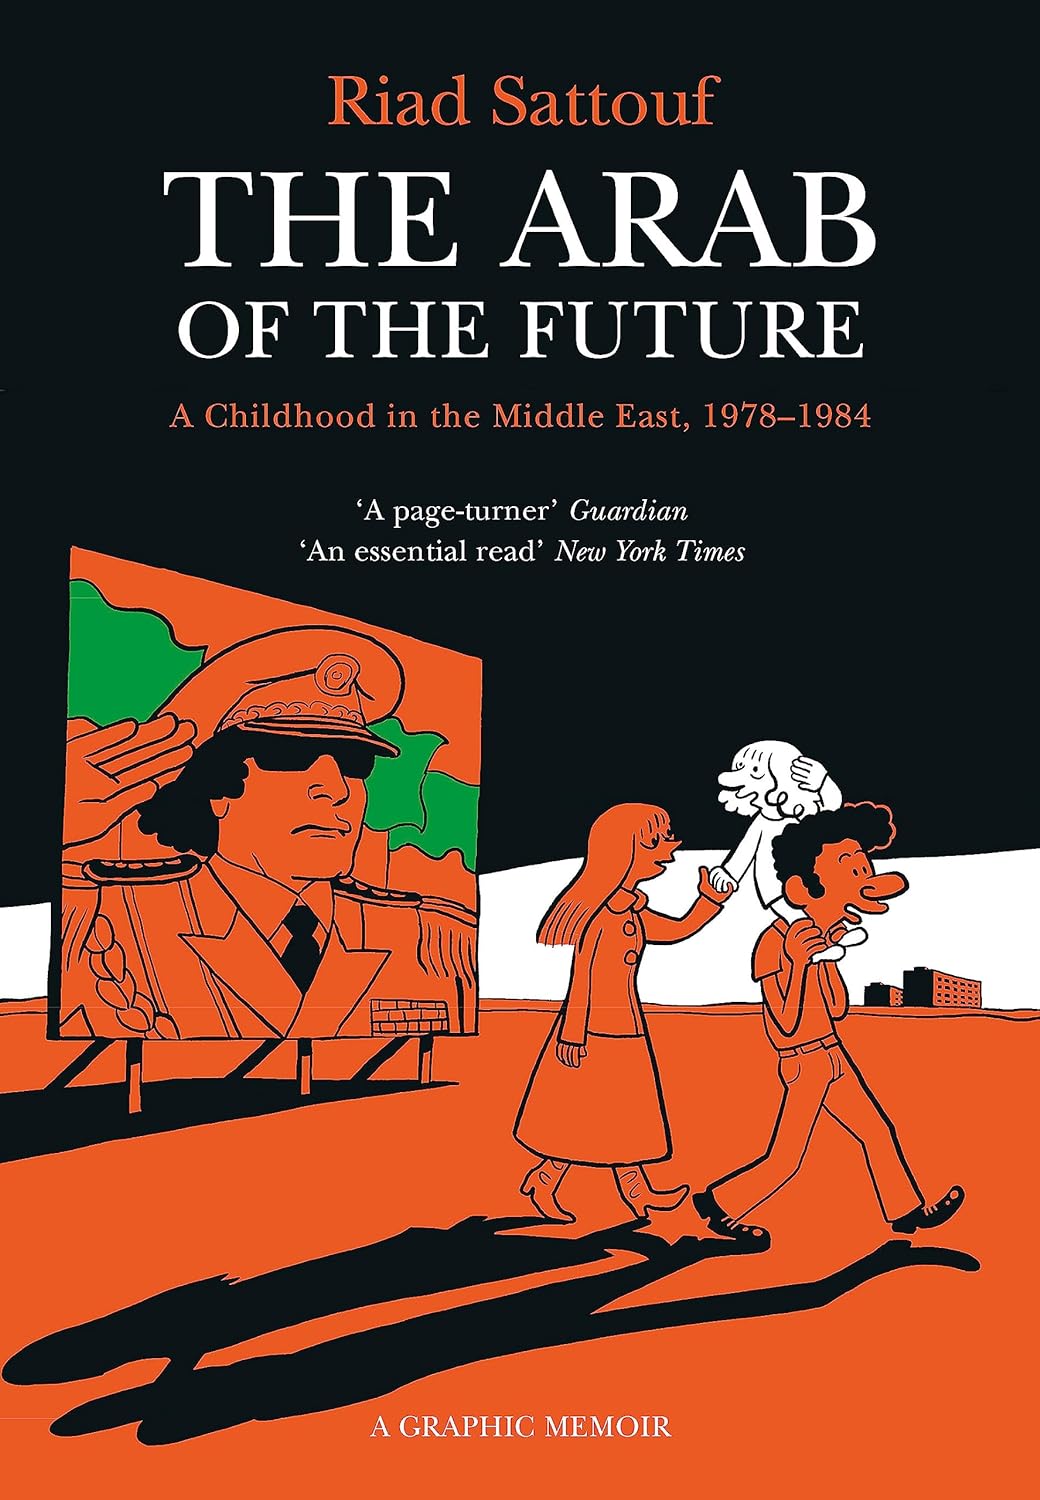 The Arab of the future